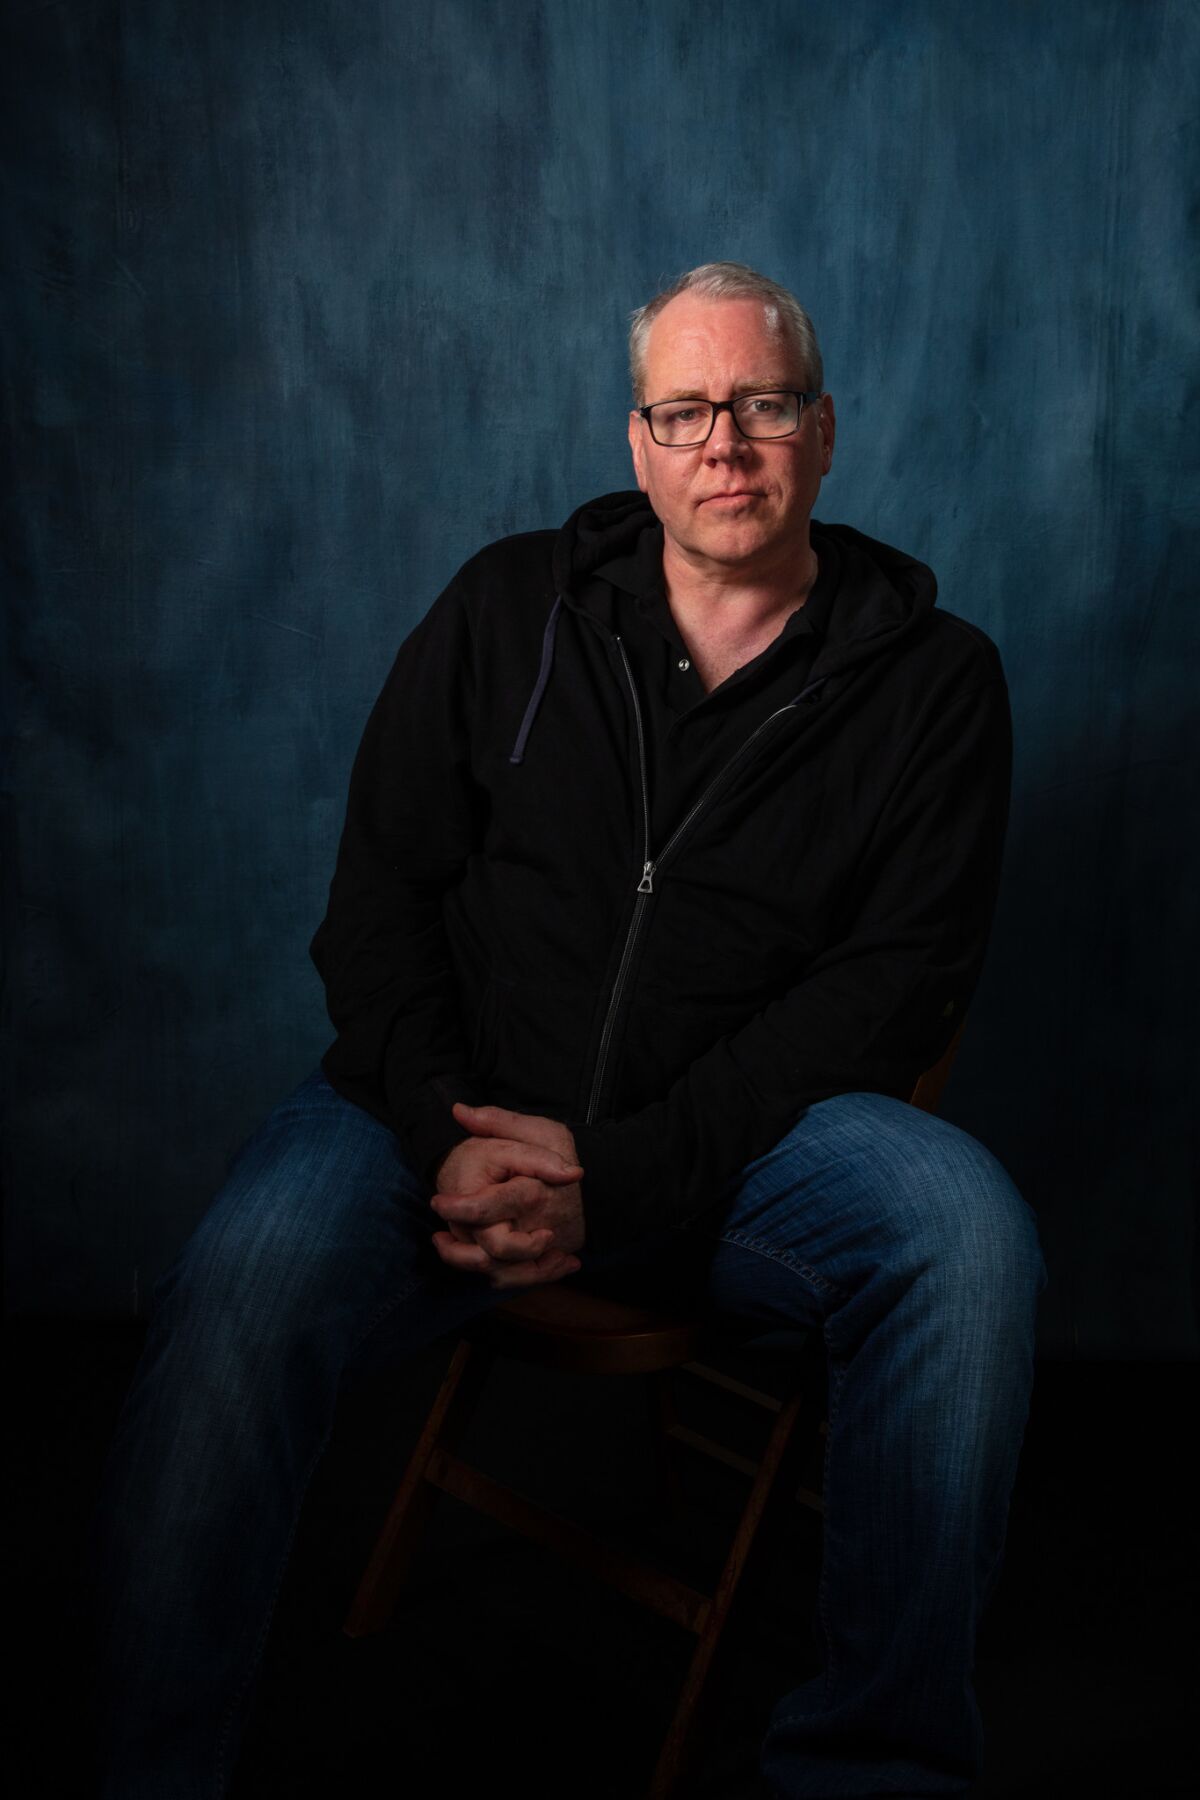 Bret Easton Ellis' newest book is "White," his first nonfiction release.